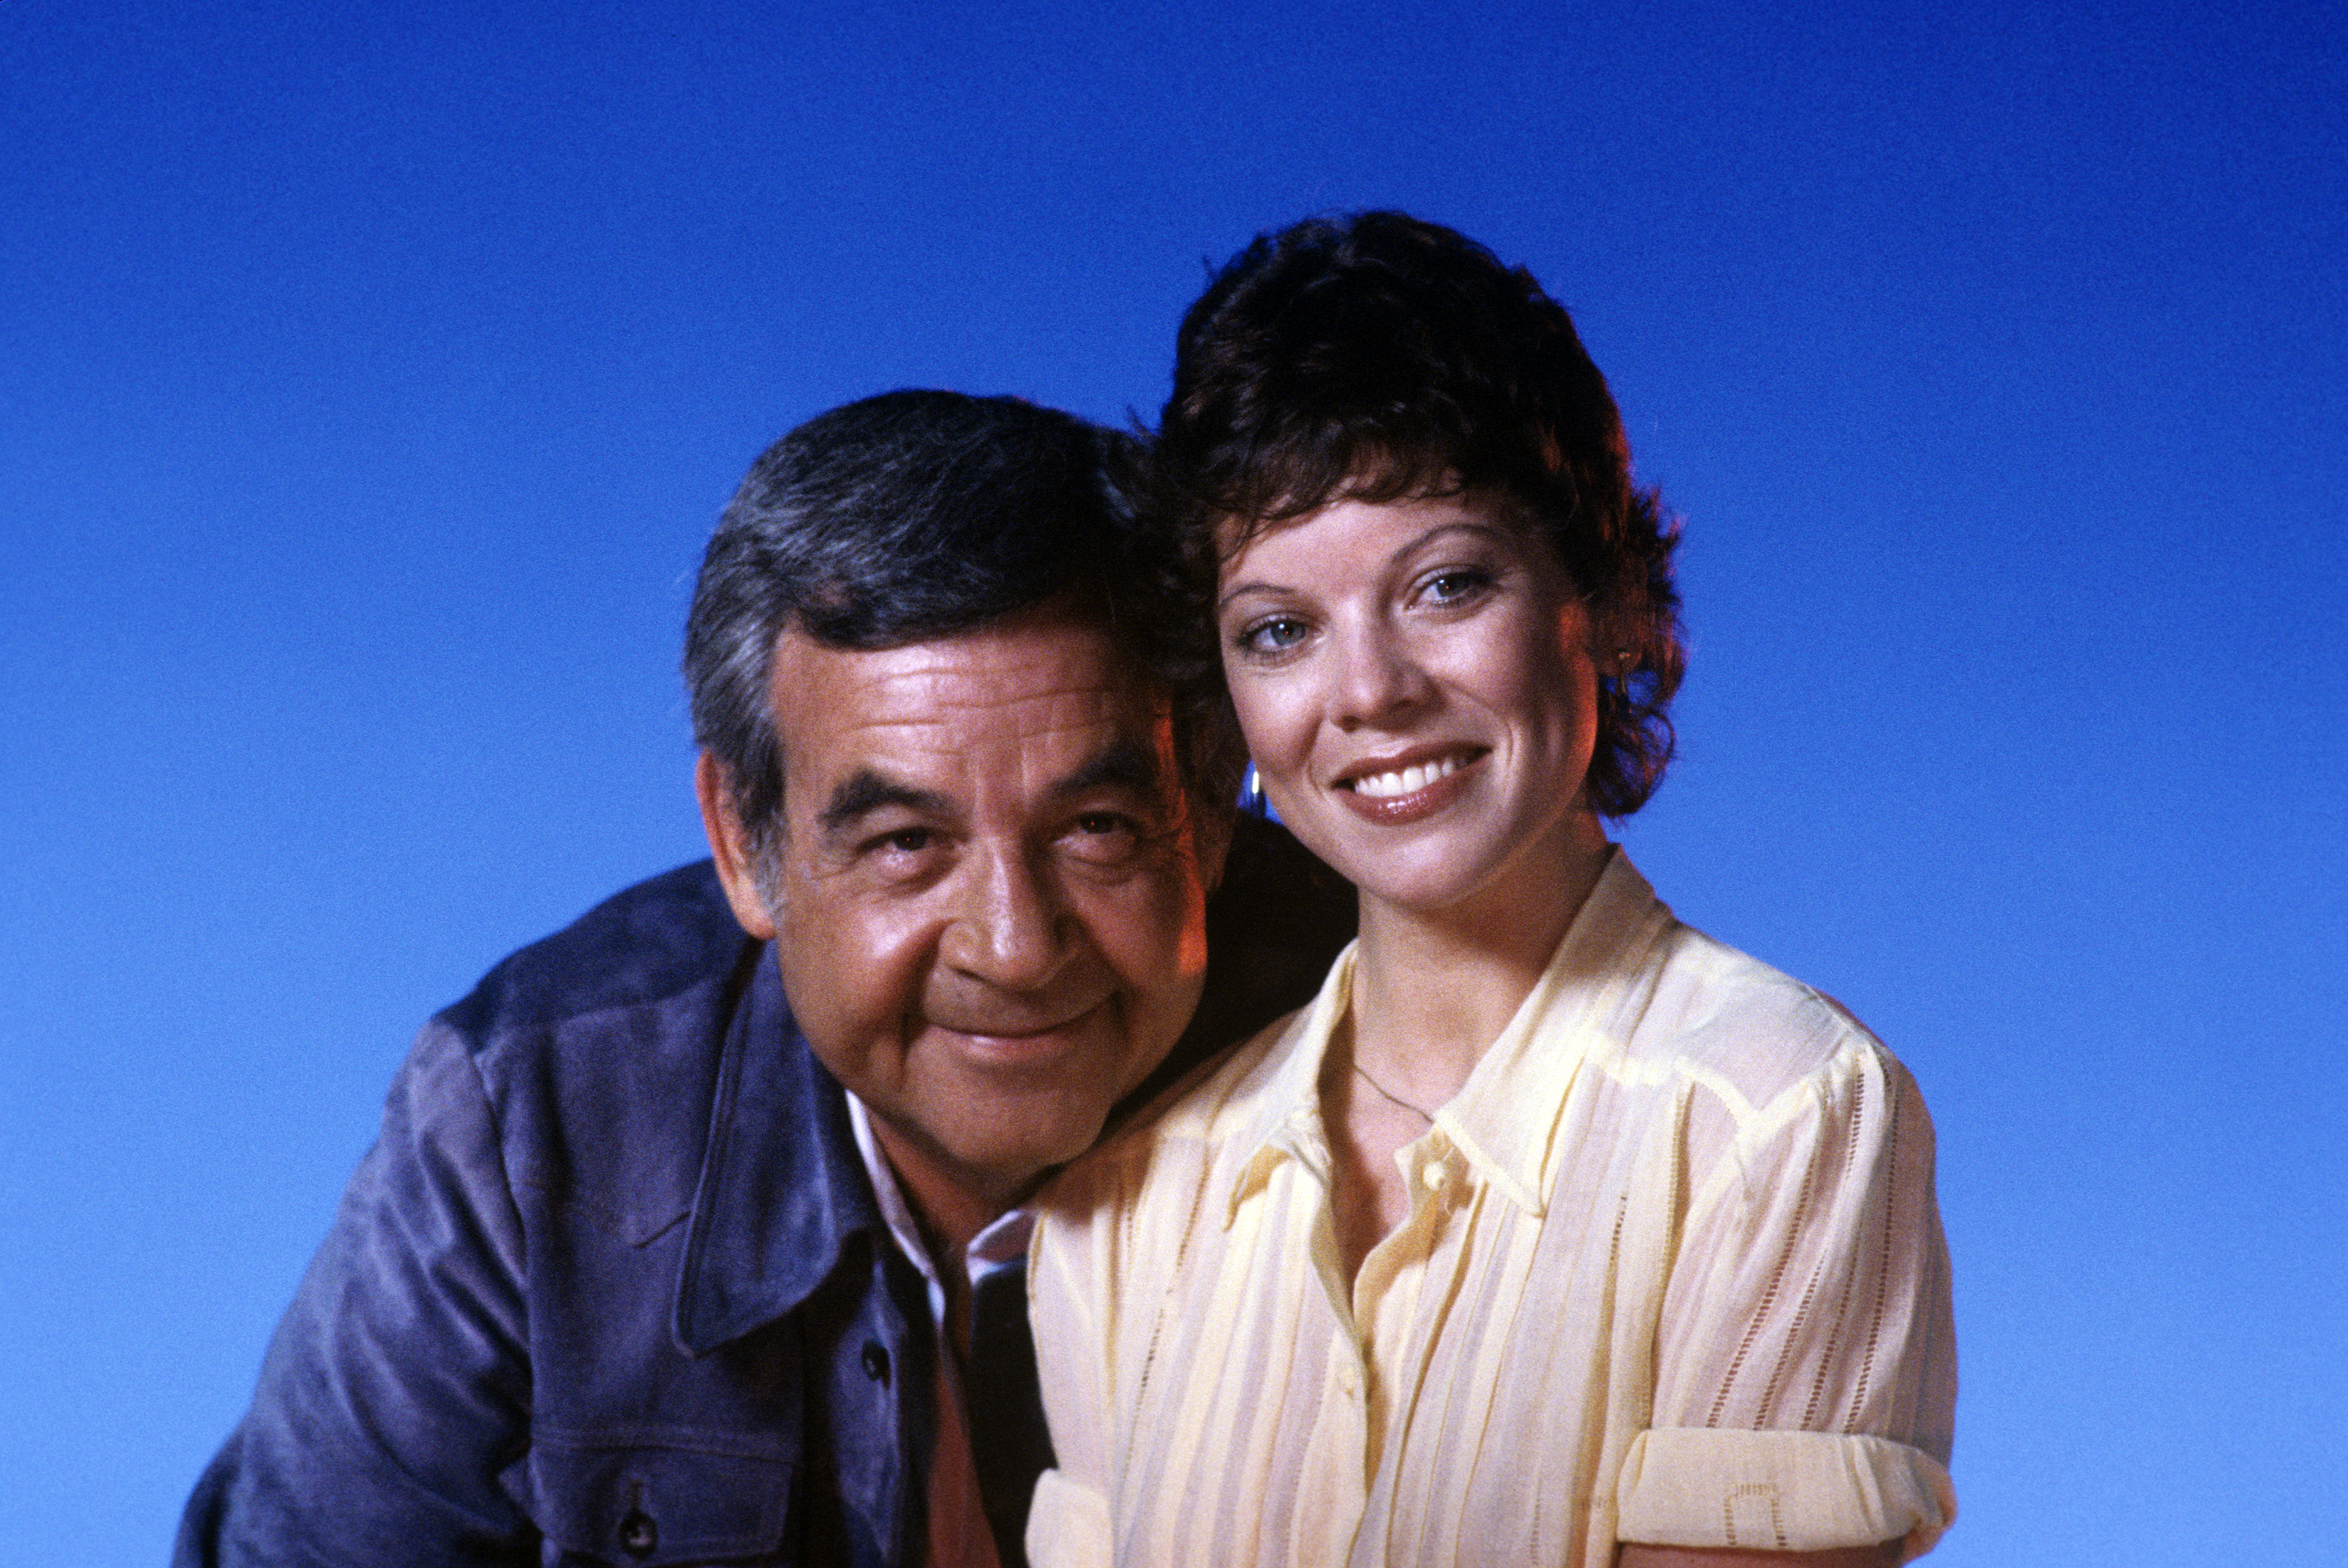 Tom Bosley and Erin Moran on the set of "Happy Days" in 1981 | Source: Getty Images